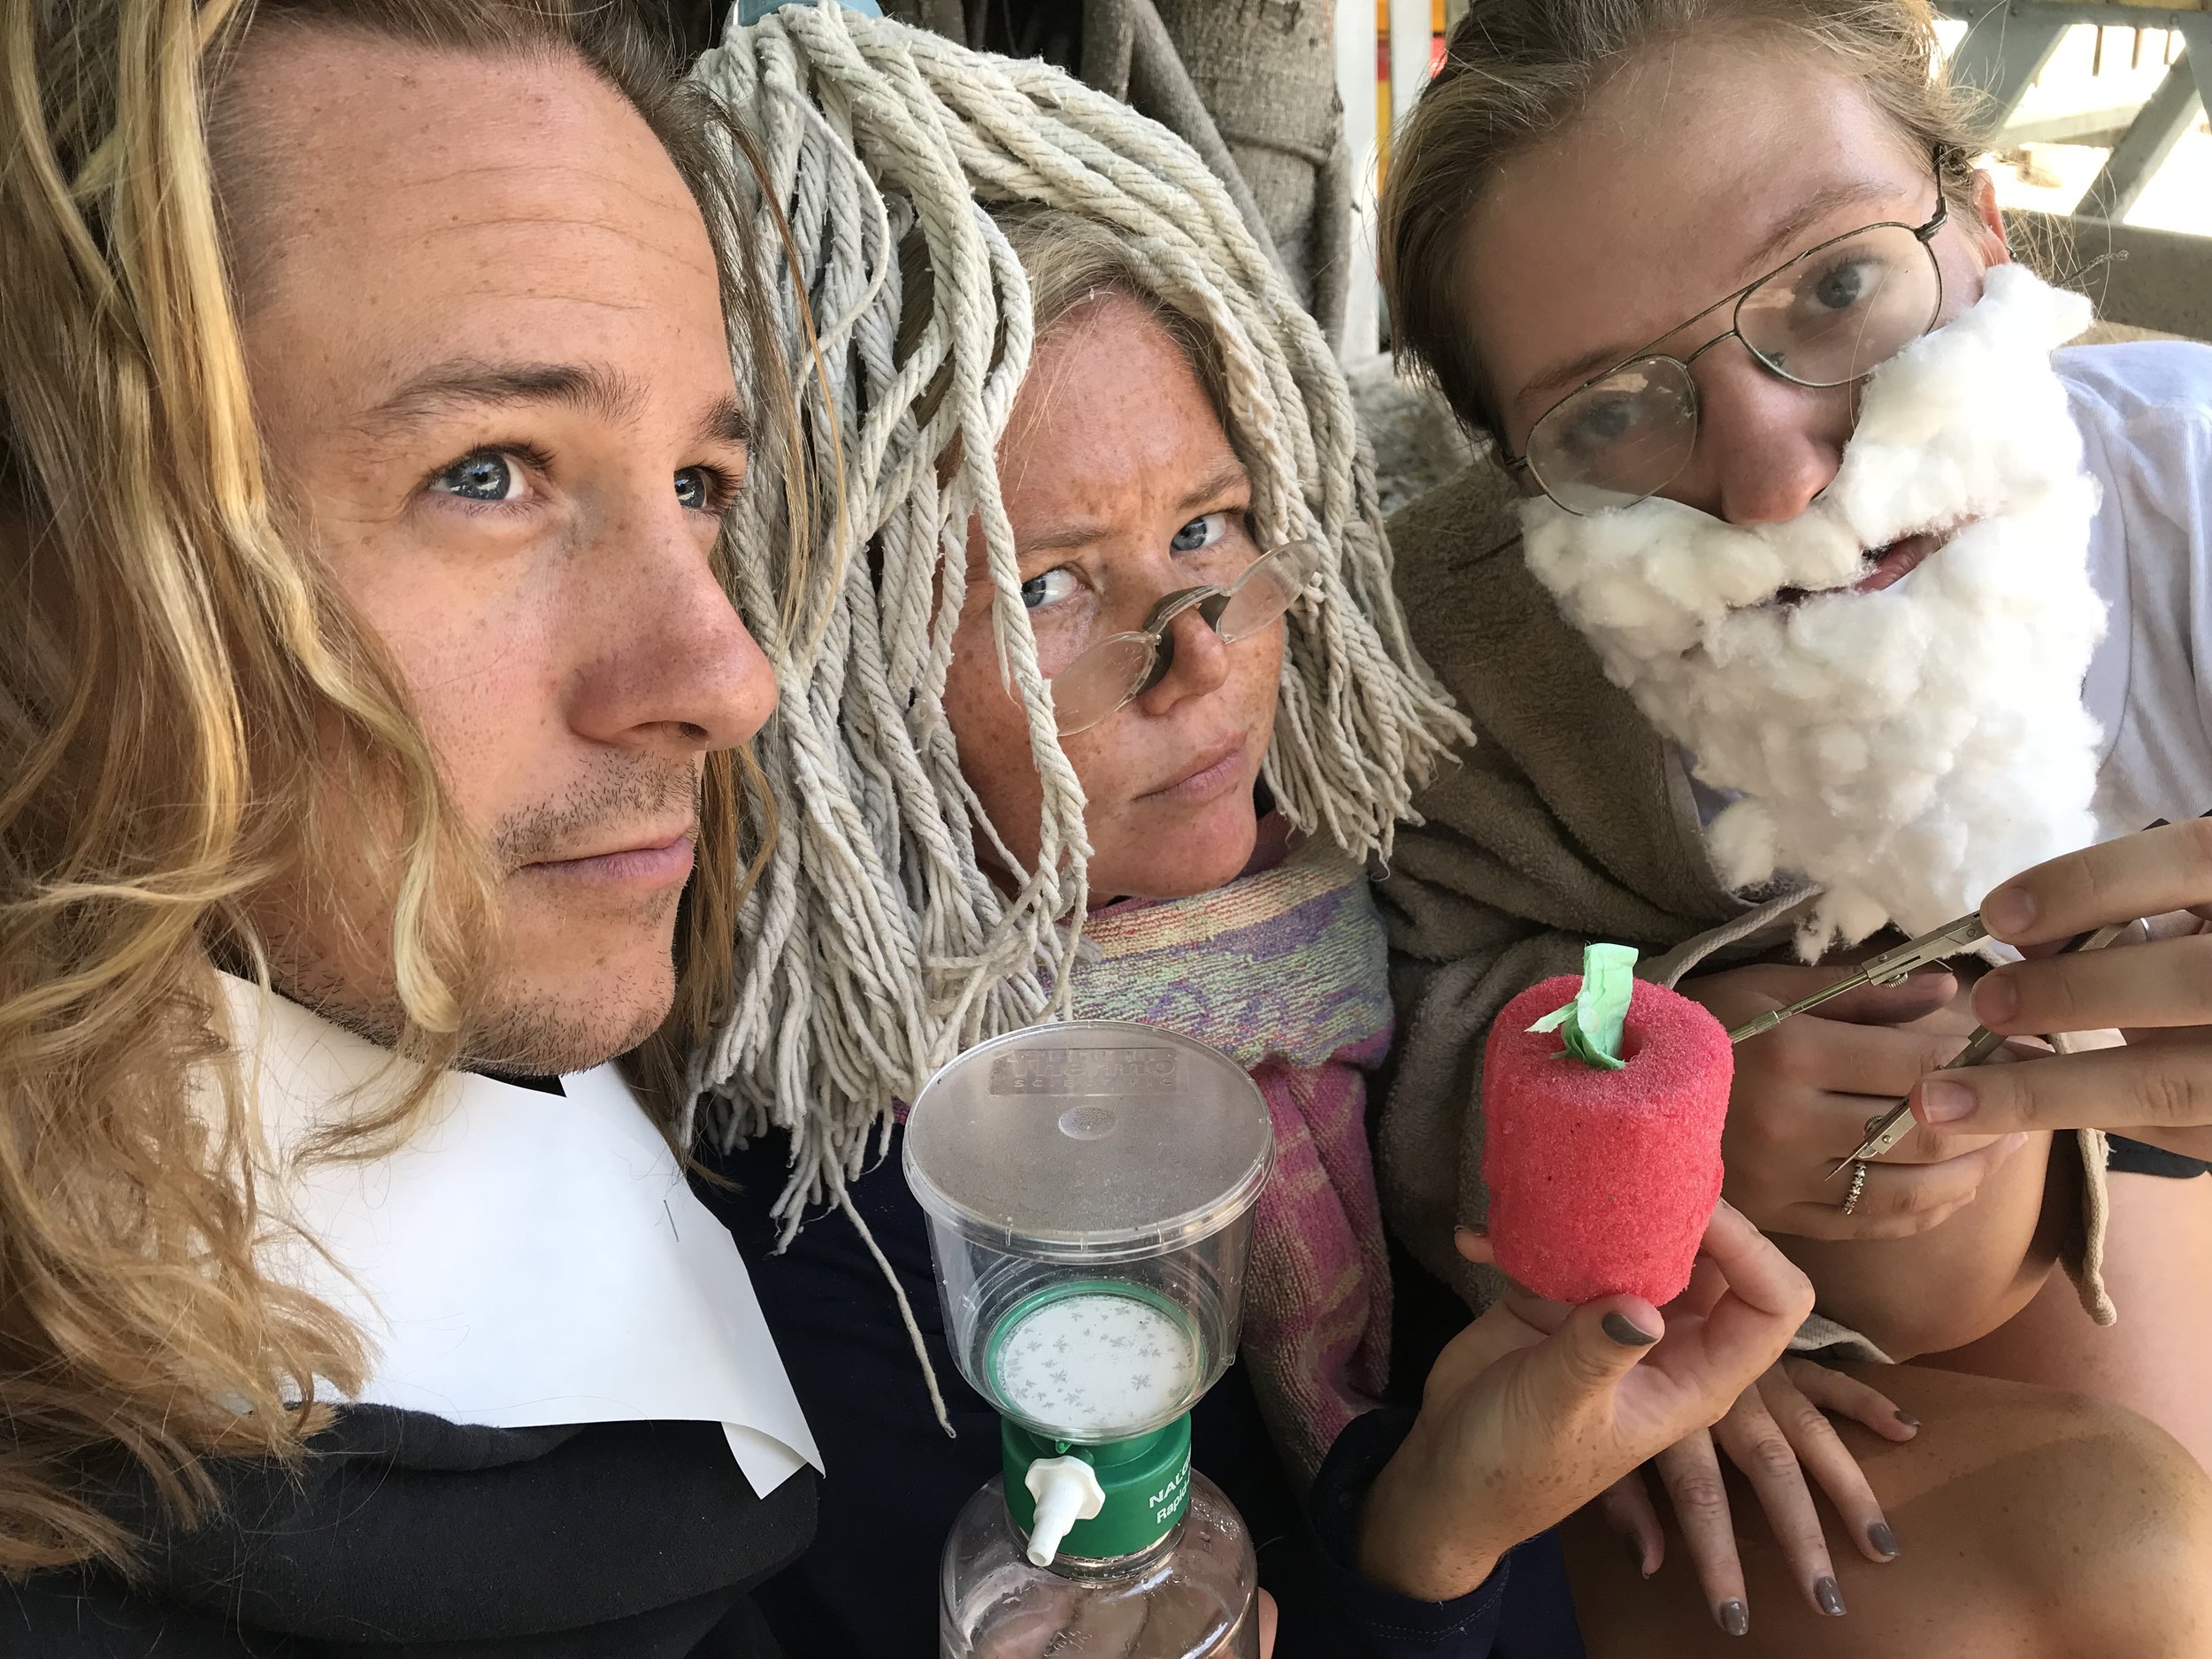 Join Sanibel Sea School for a season of after school science crime solving with Archimedes, Sir Isaac Newton, and Blaise Pascal.